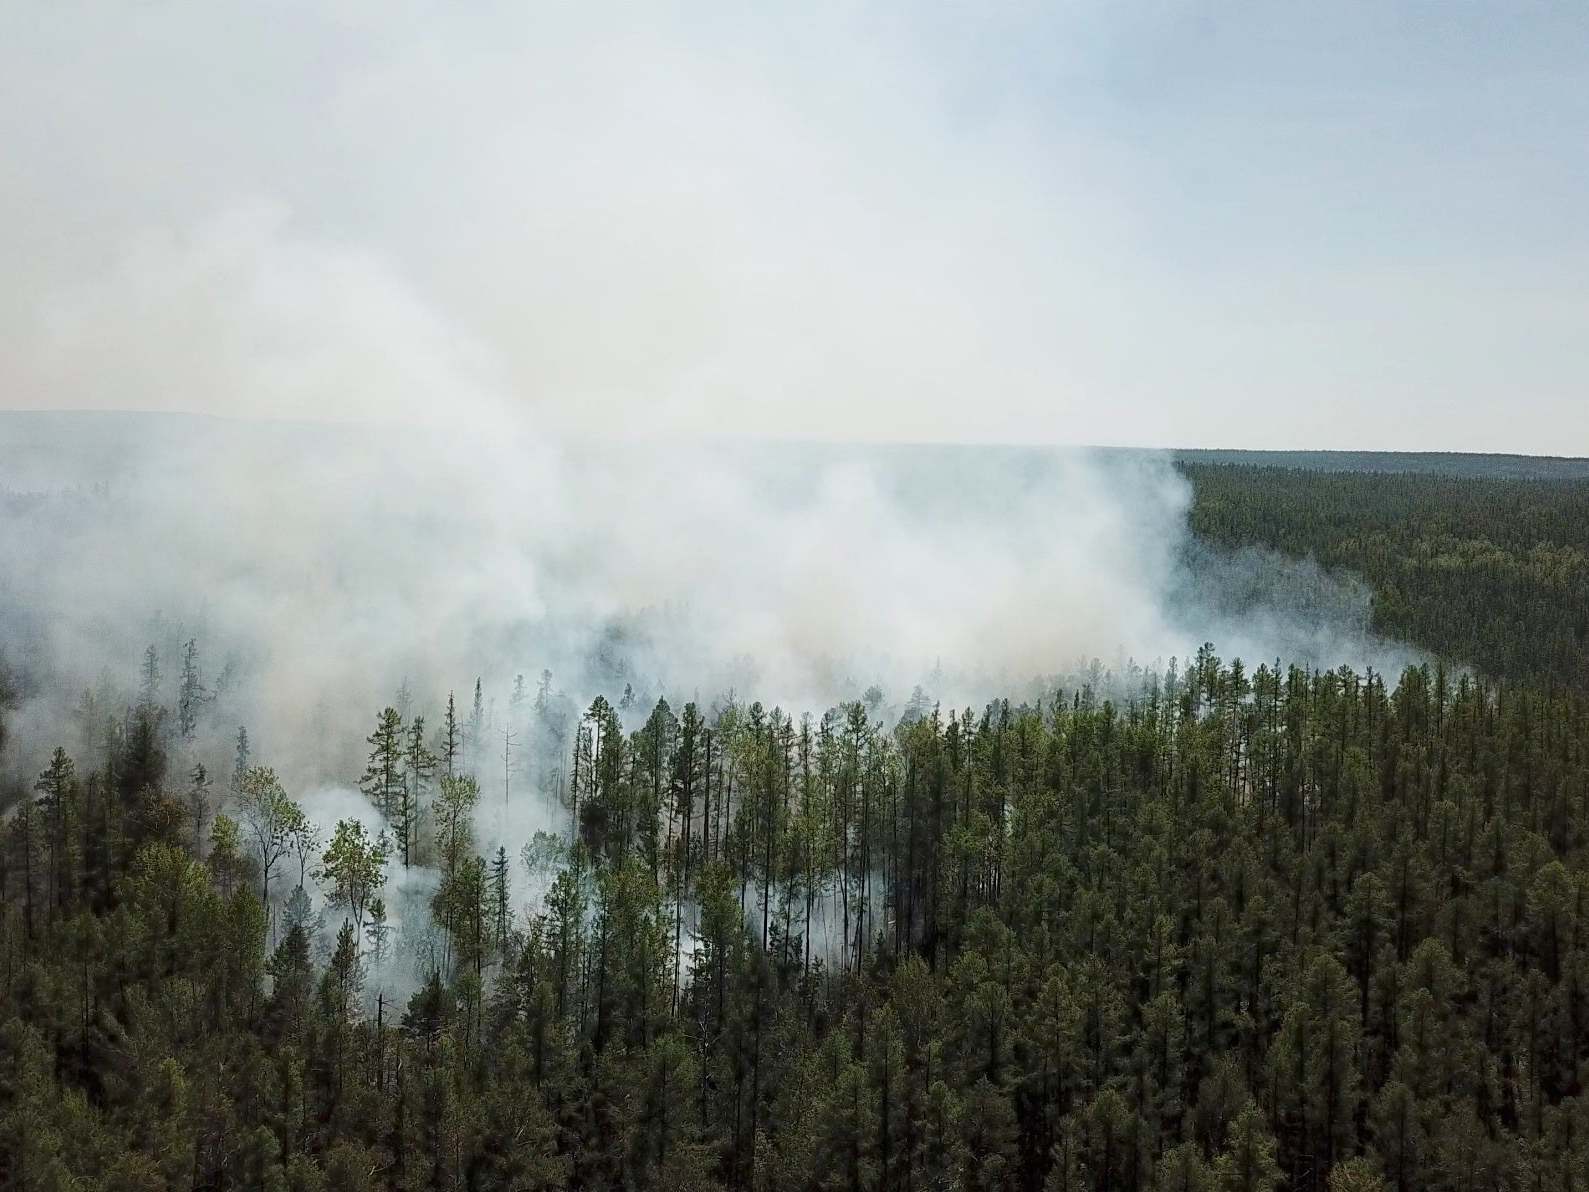 Siberia's heatwave has caused wildfires in the region, further deepening the climate crisis